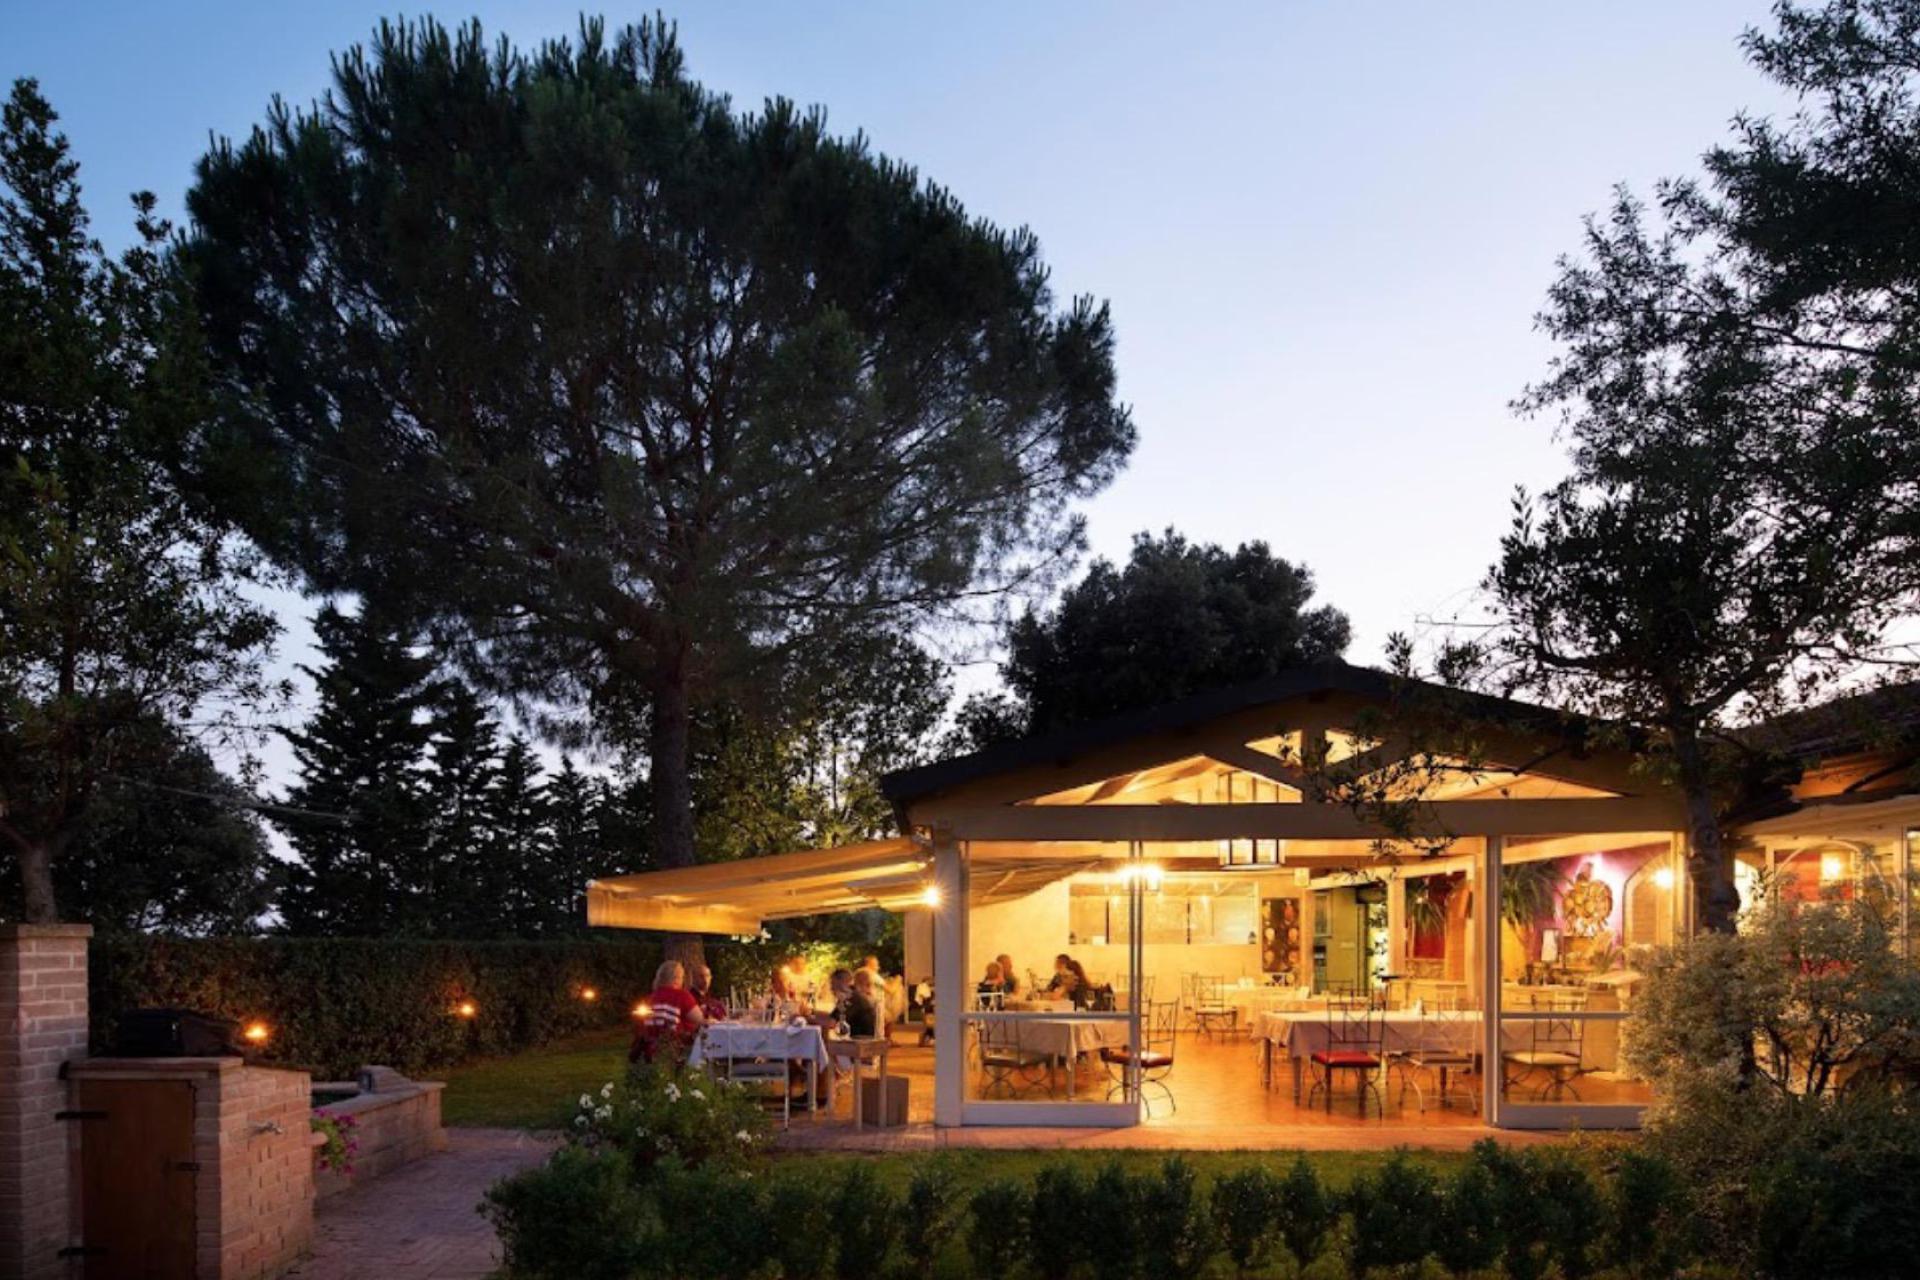 Child-friendly agriturismo with cozy restaurant